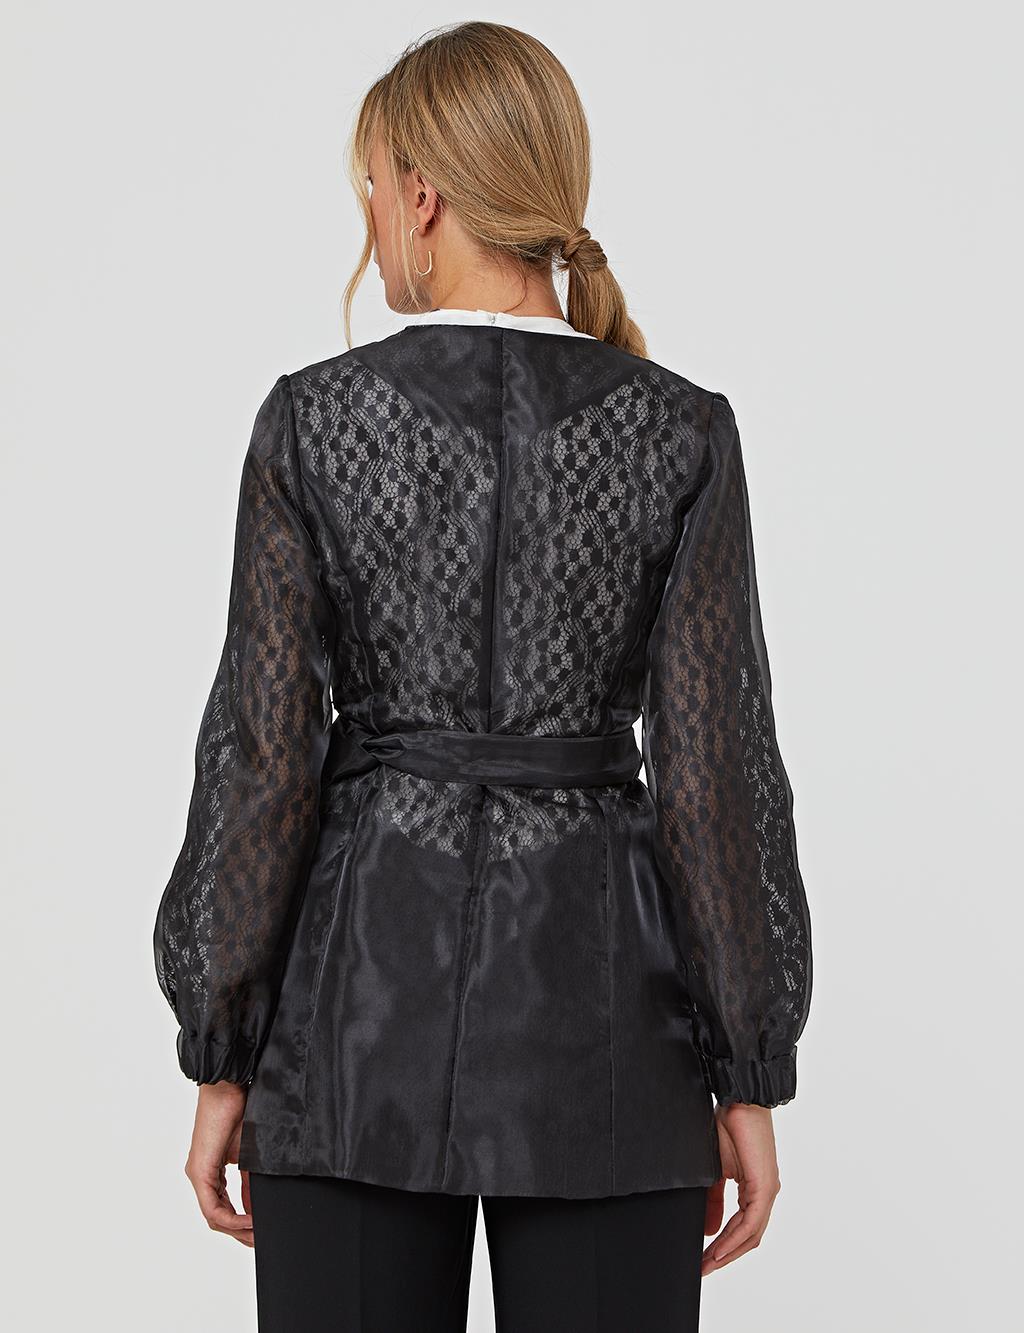 Jacquard Double Breasted Jacket A21 13016 Black